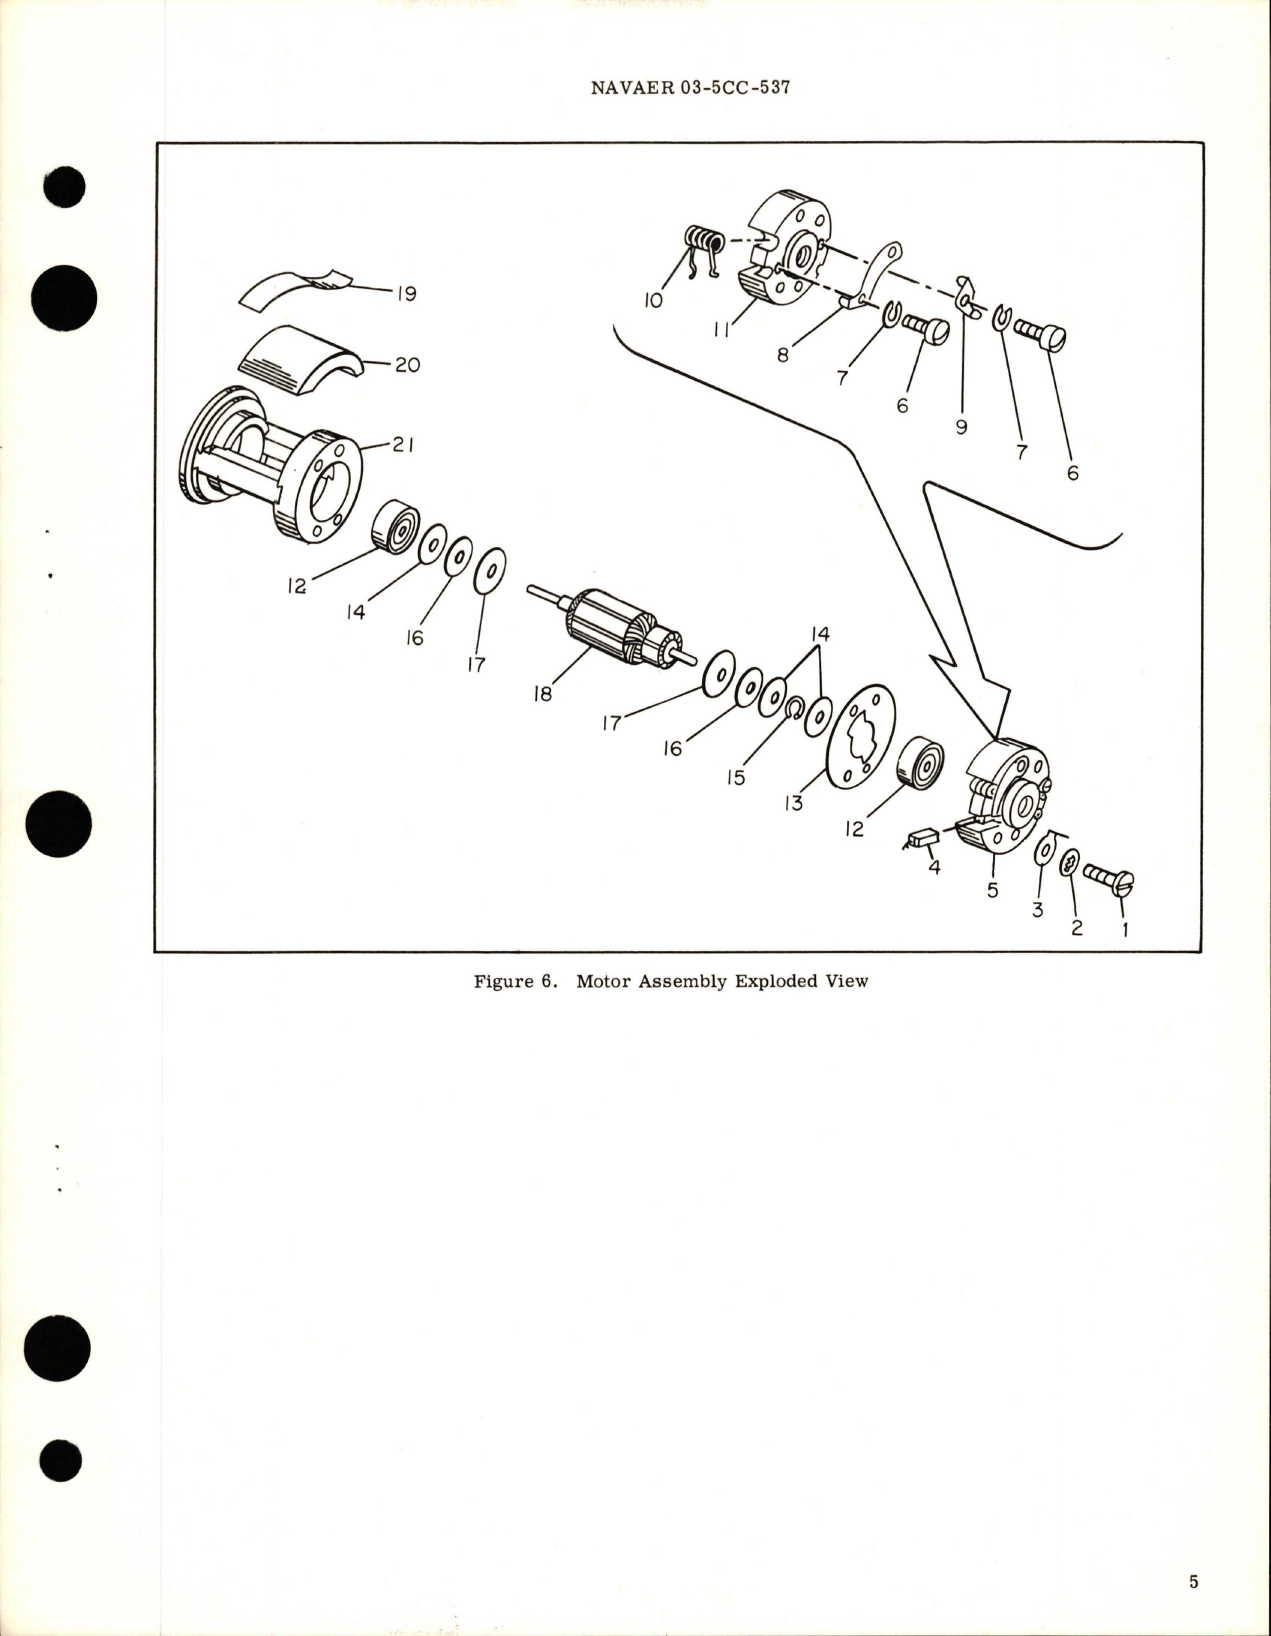 Sample page 5 from AirCorps Library document: Overhaul Instructions with Parts Breakdown for Stall Warning Vibrator Actuator - parts C-3A-806, C-35A-503, and 35A505 